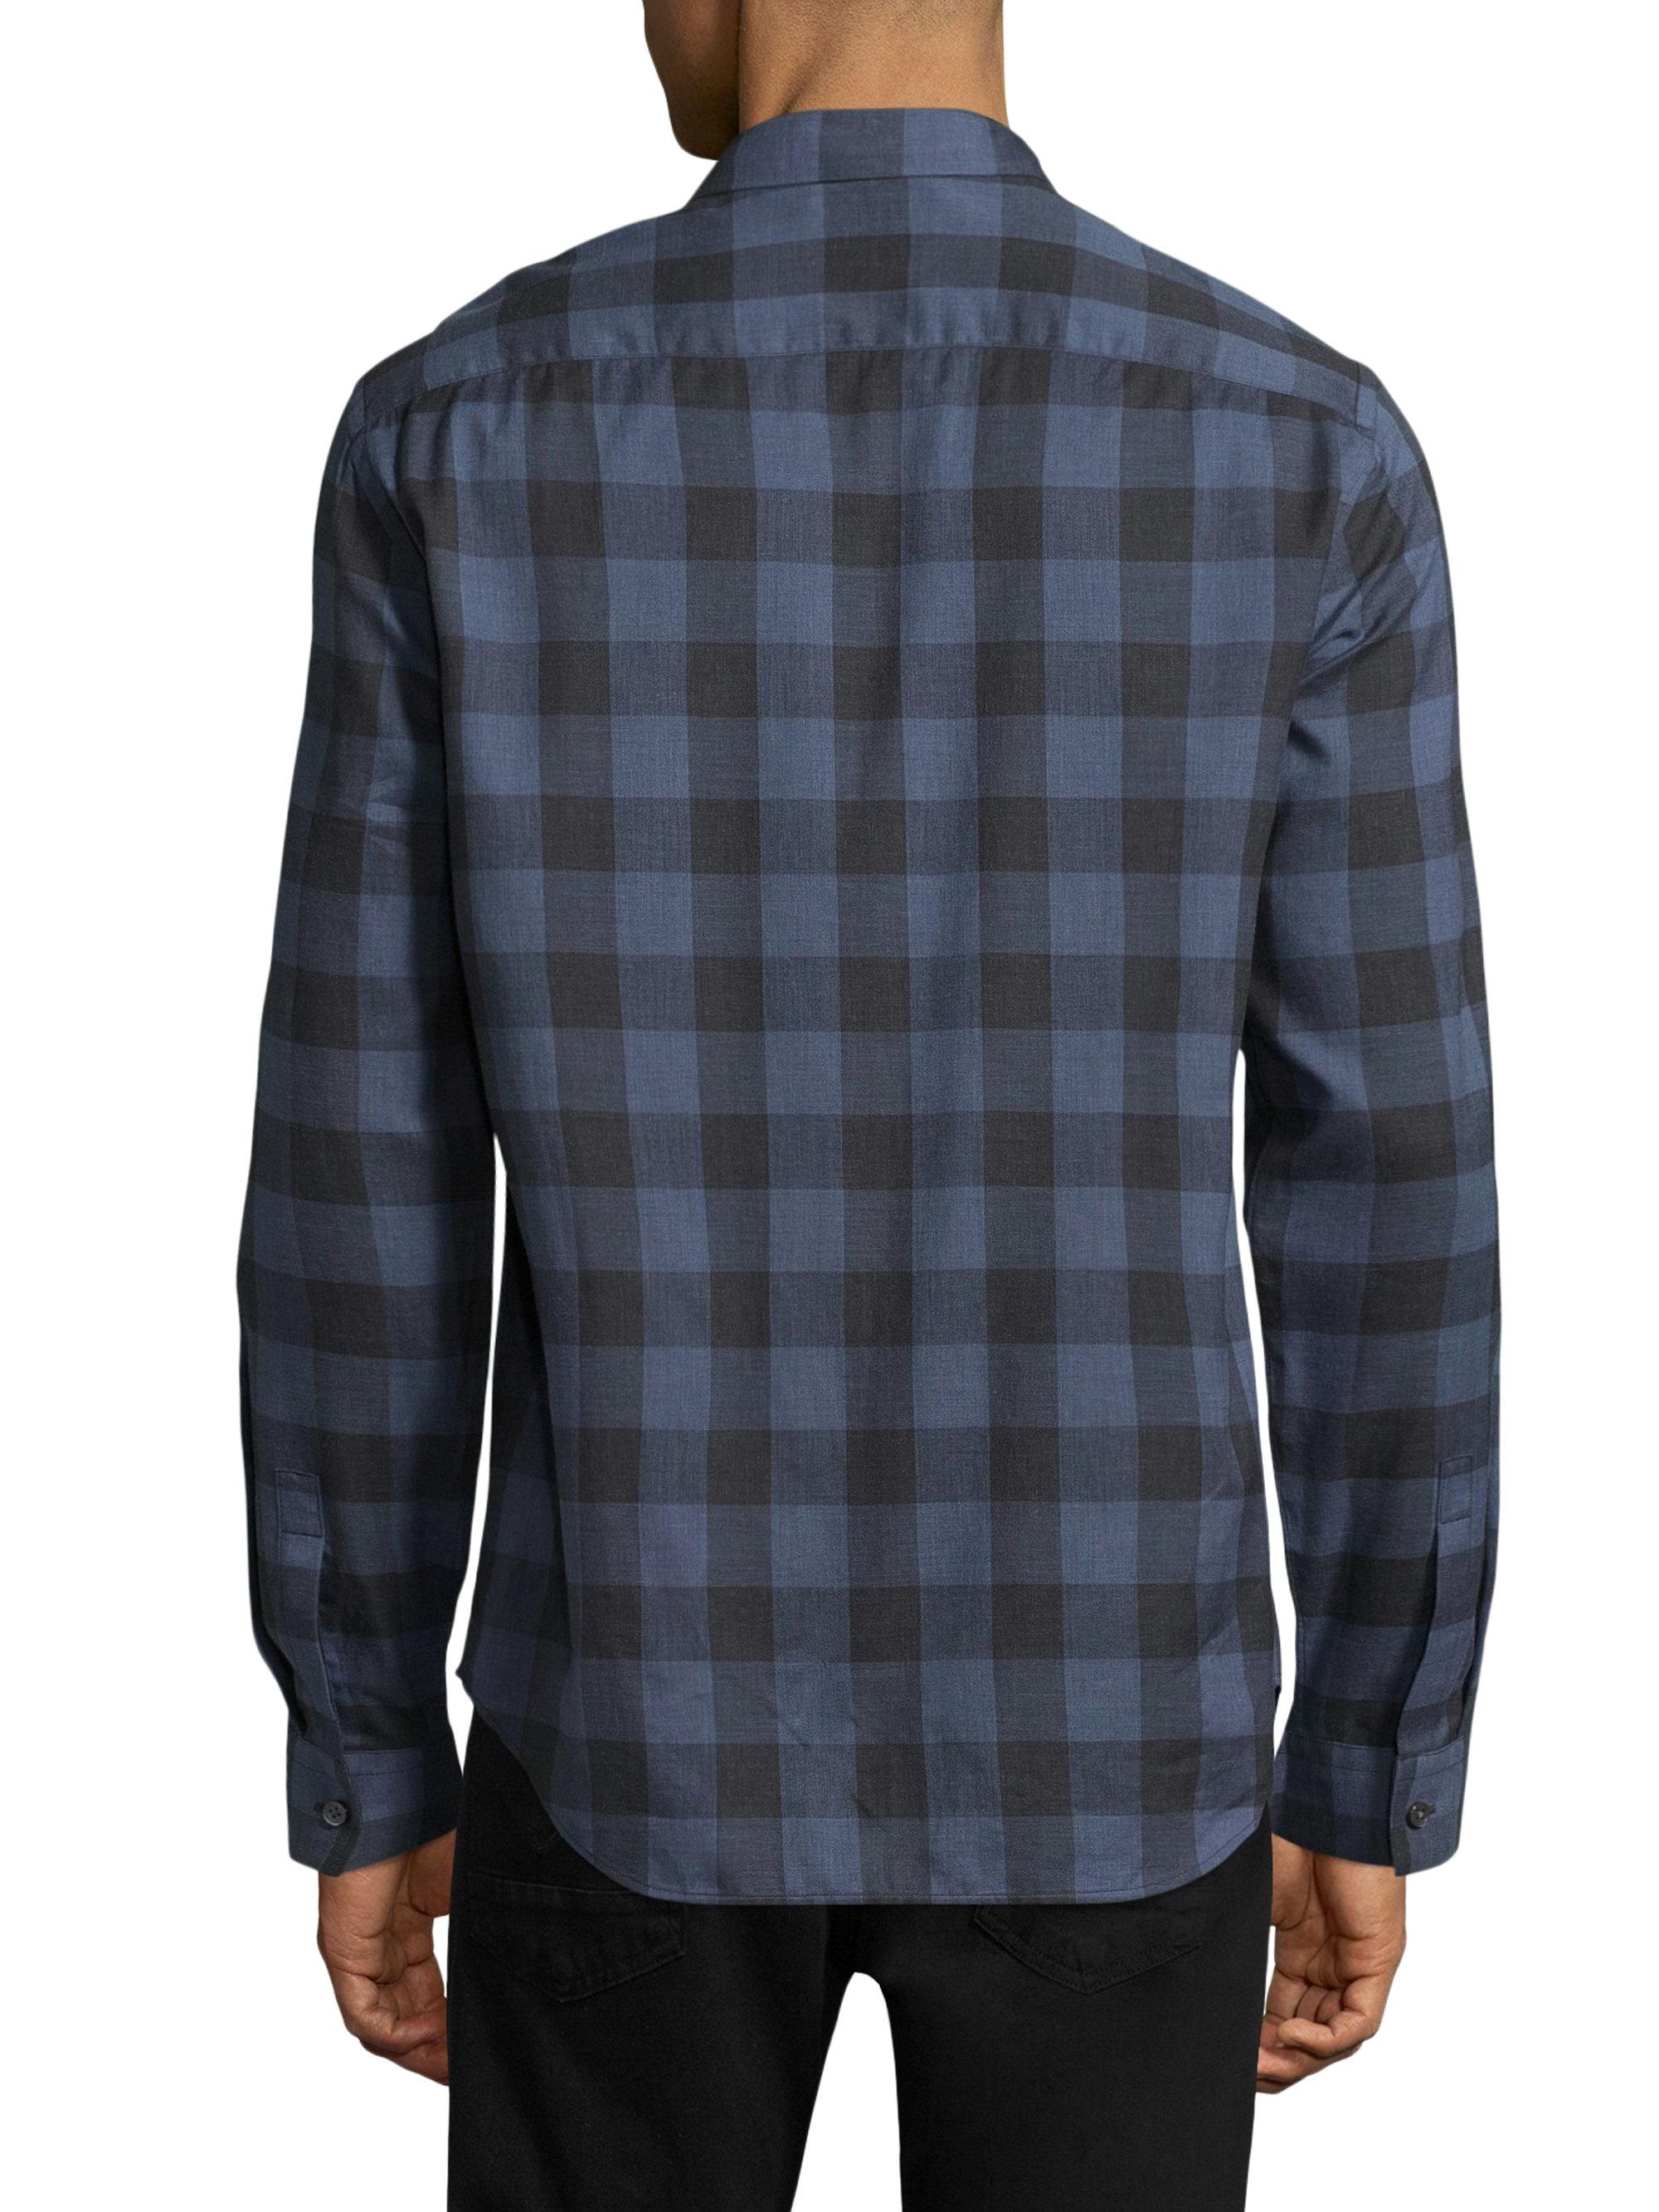 Lyst - Theory Plaid Cotton Casual Button-down Shirt in Gray for Men